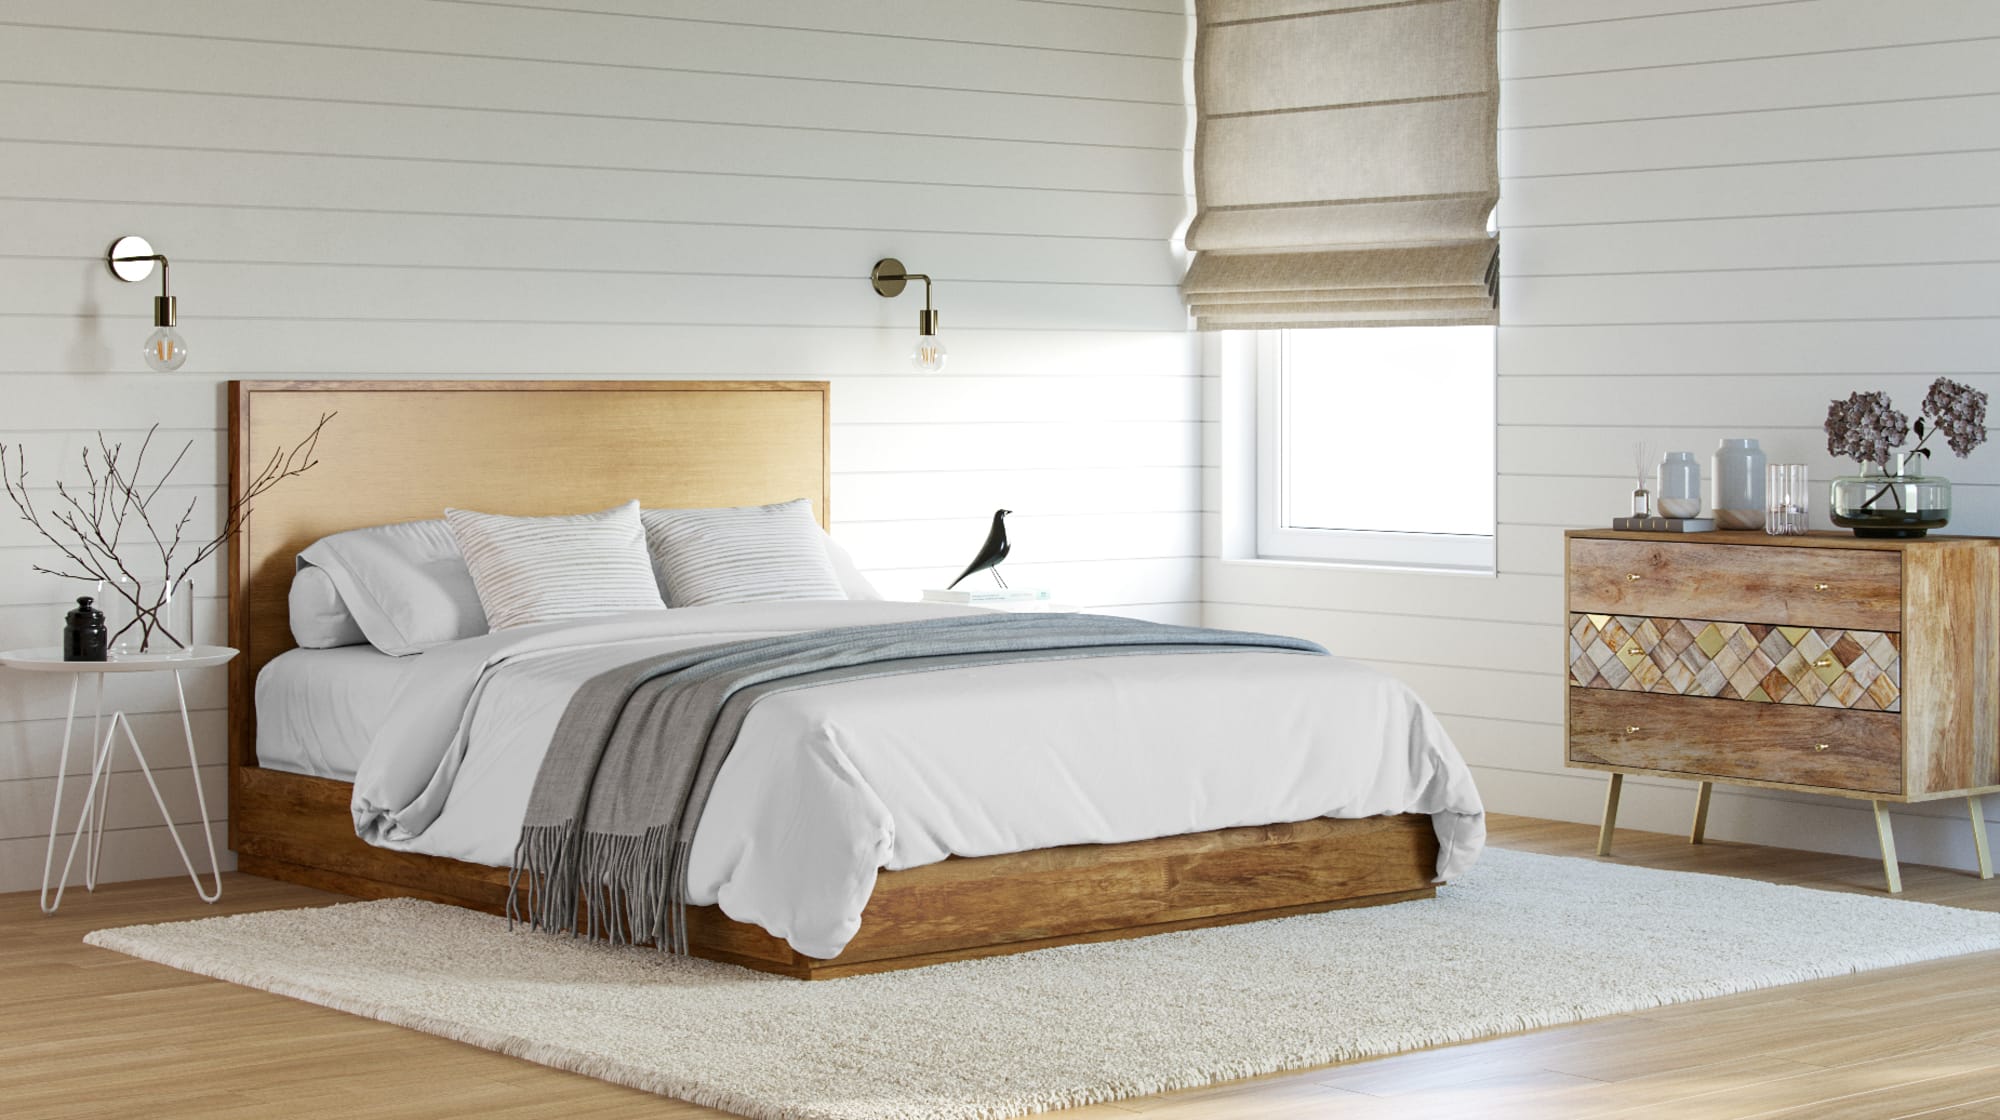 Wooden Bed Frames Are The Timeless Item That’ll Transform Your Bedroom